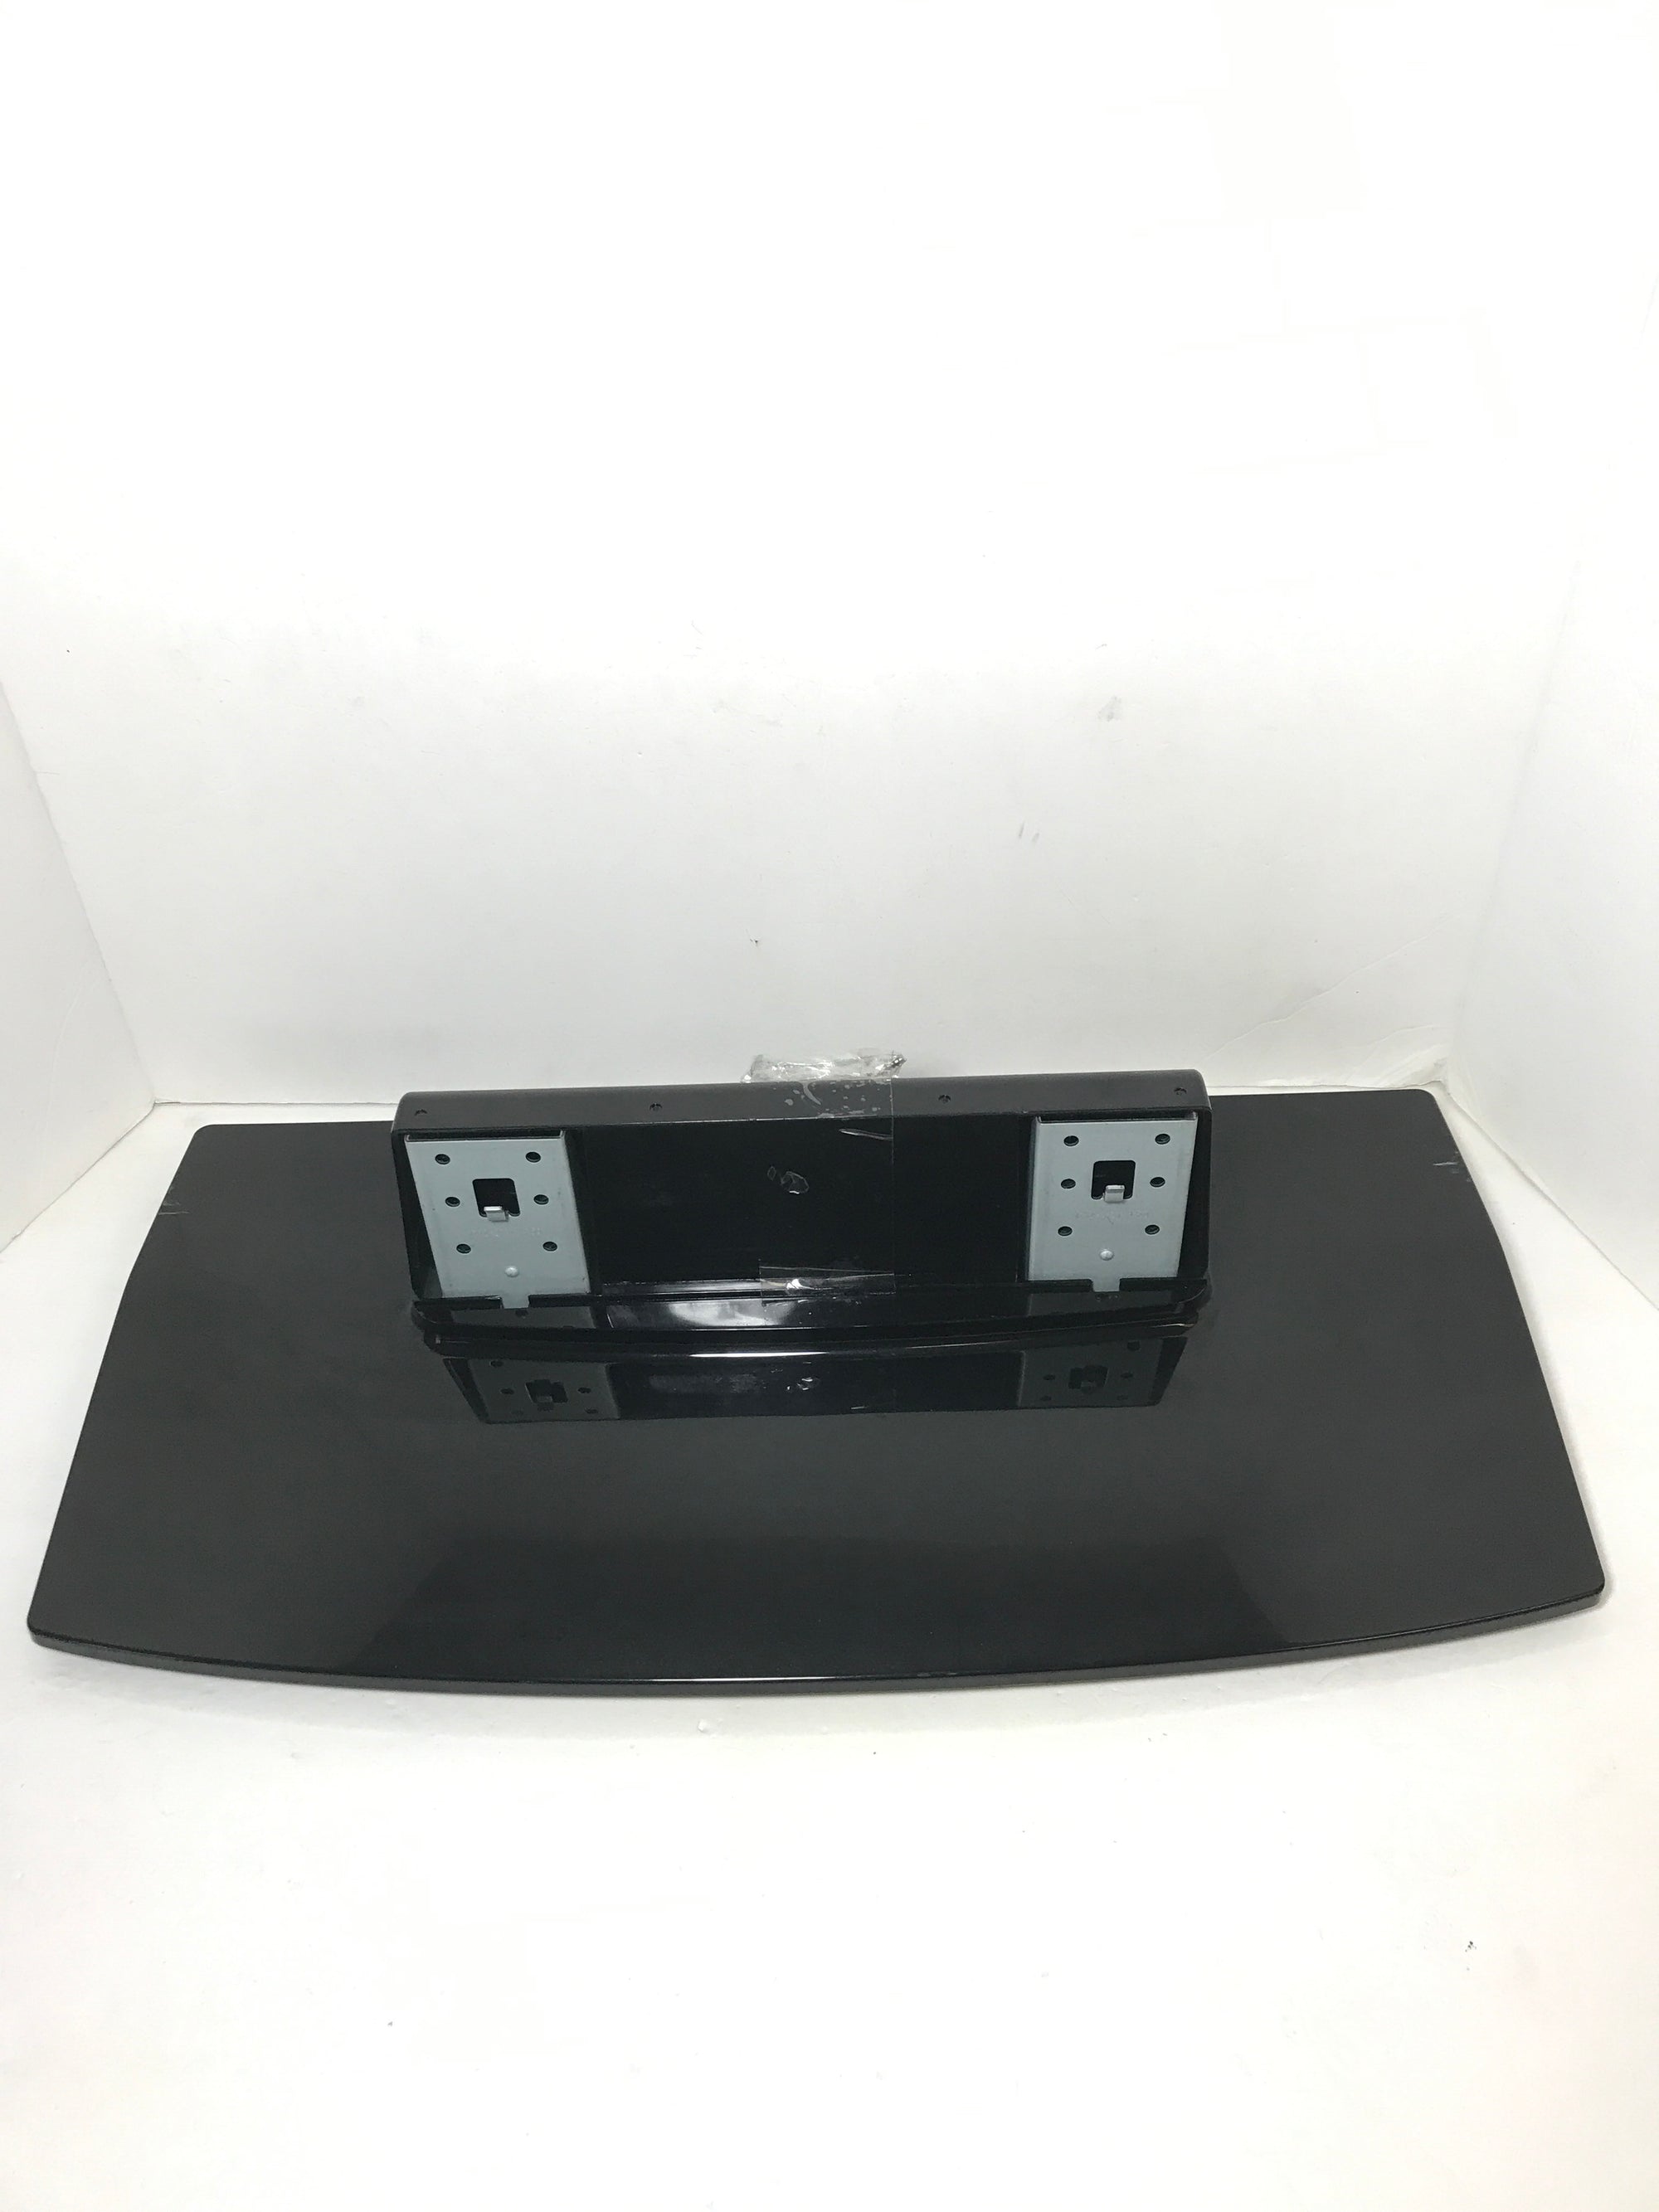 Vizio Sv471xvt And Sv472xvt Tv Stand Base Short Circuit Solution